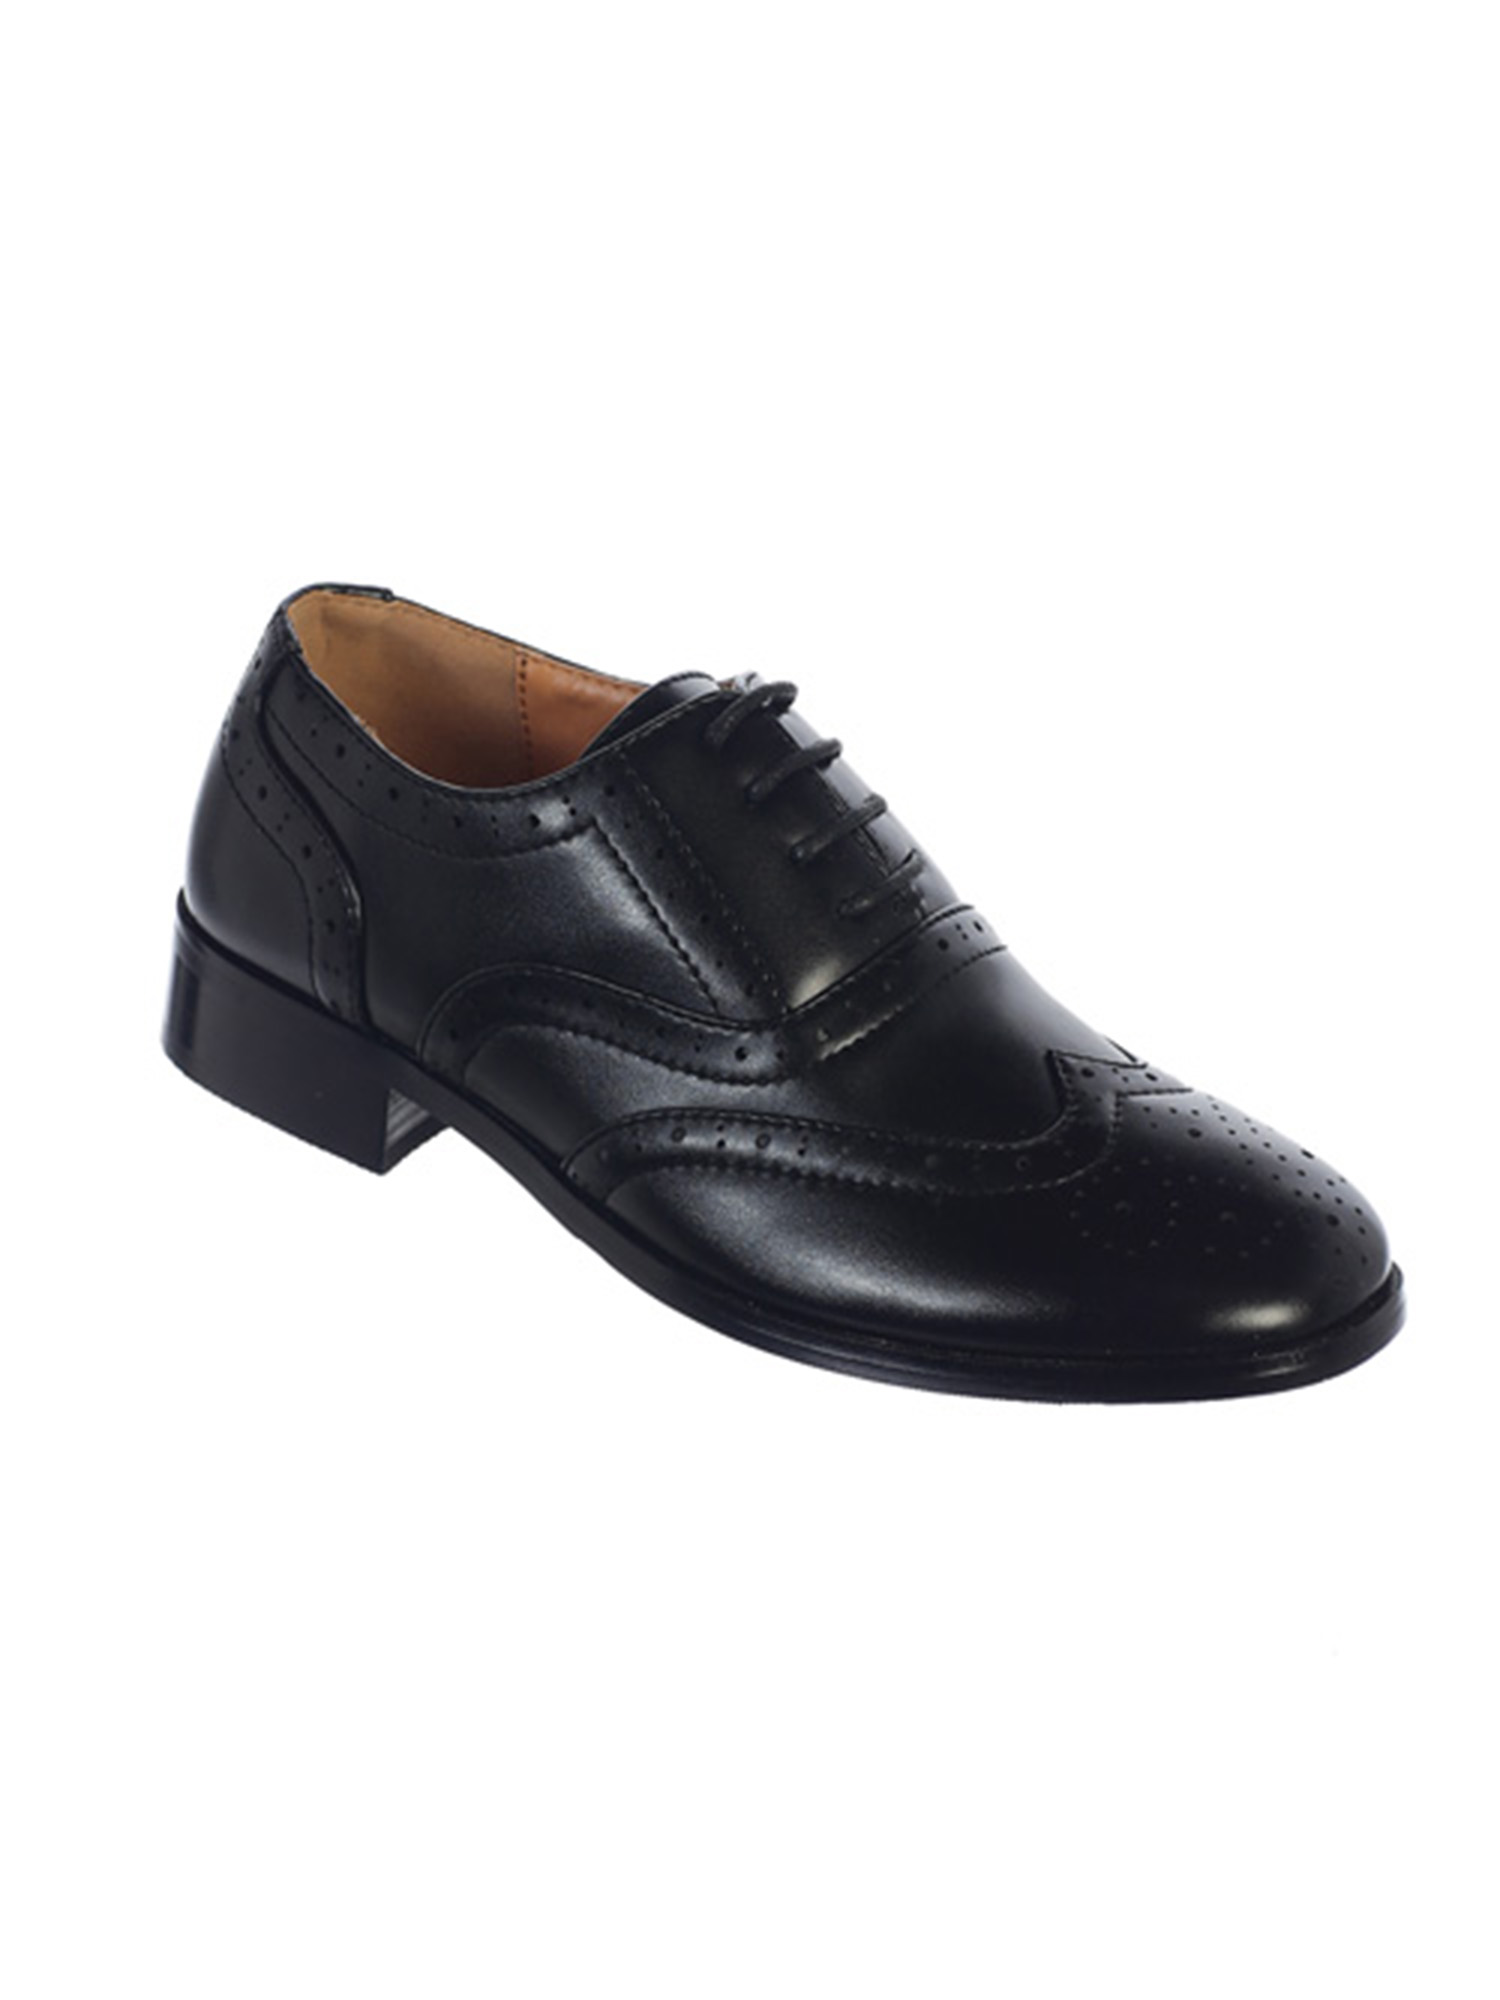 Avery Hill Boys Lace-Up Formal Oxford Style Special Occasion Dress Shoes - Black LittleKid 13